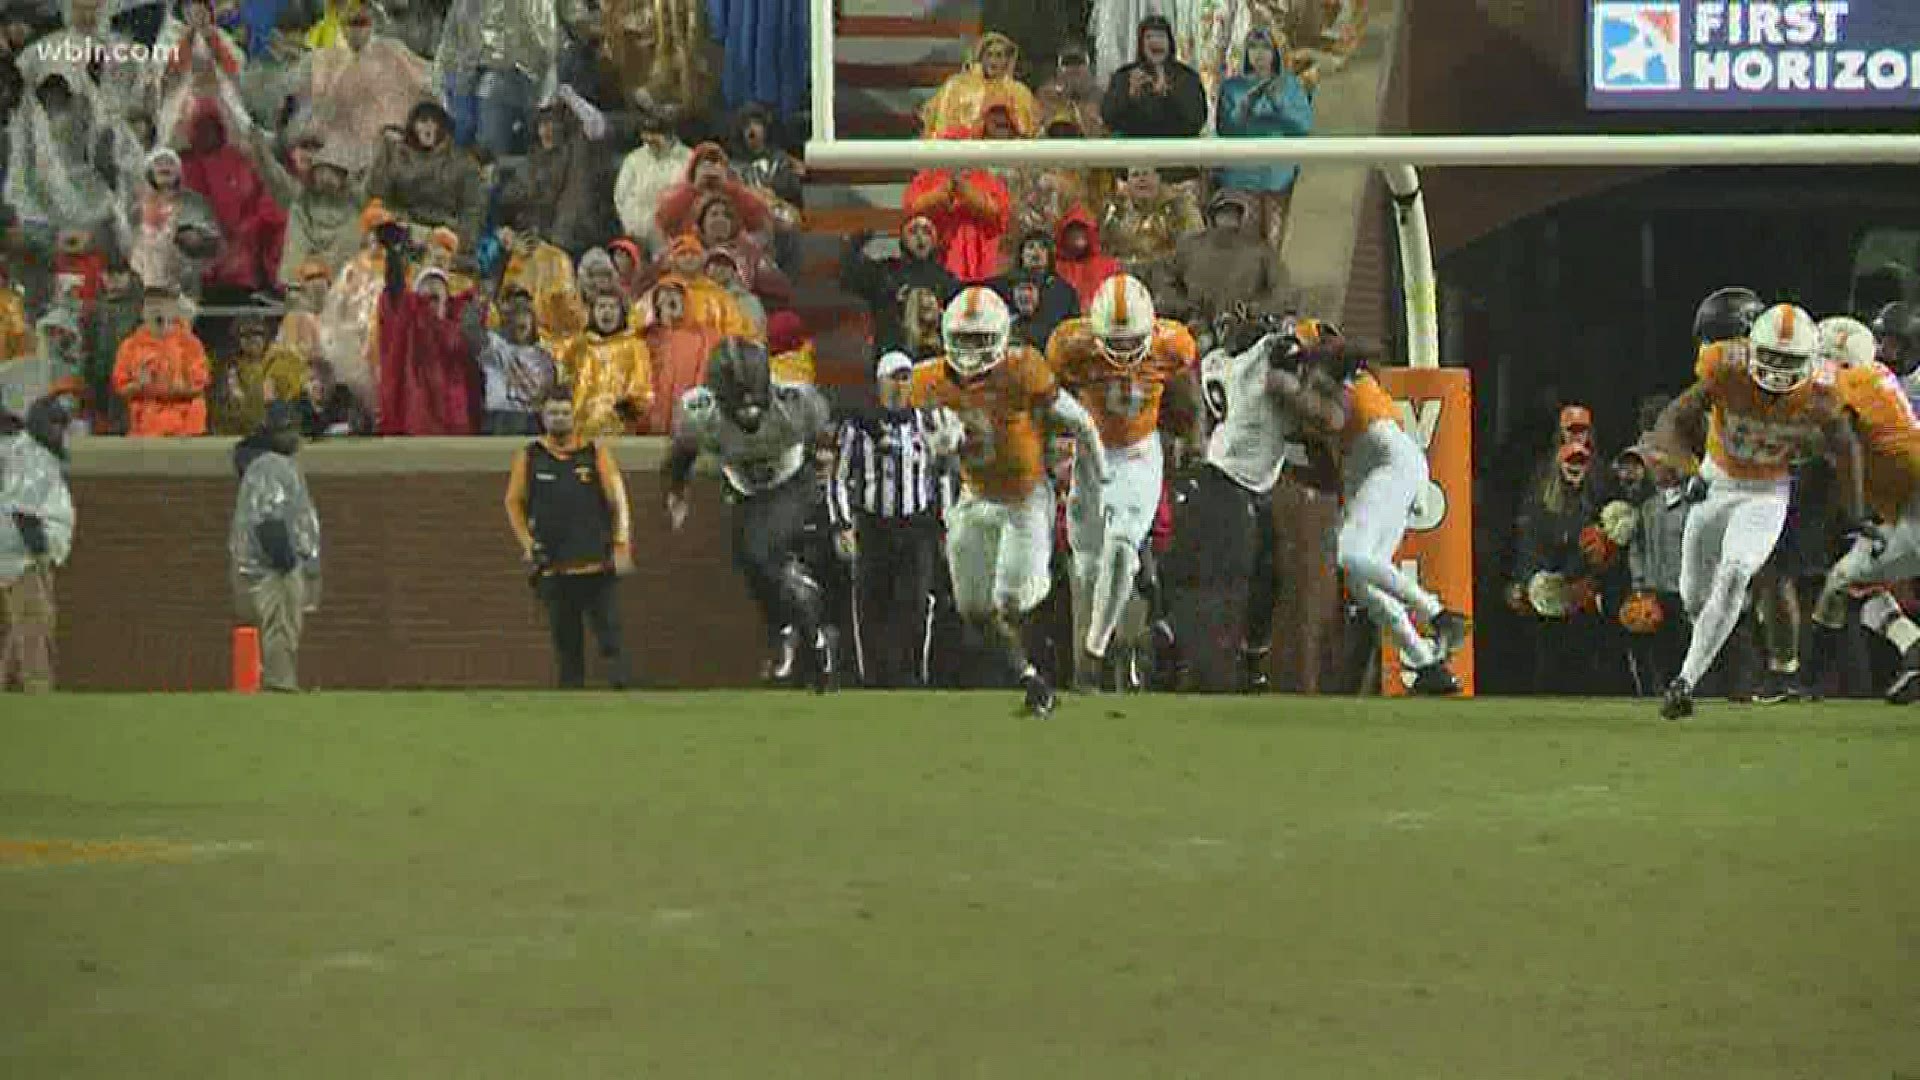 UT Athletics said that it plans to go on as scheduled, but they are also monitoring the coronavirus situation.